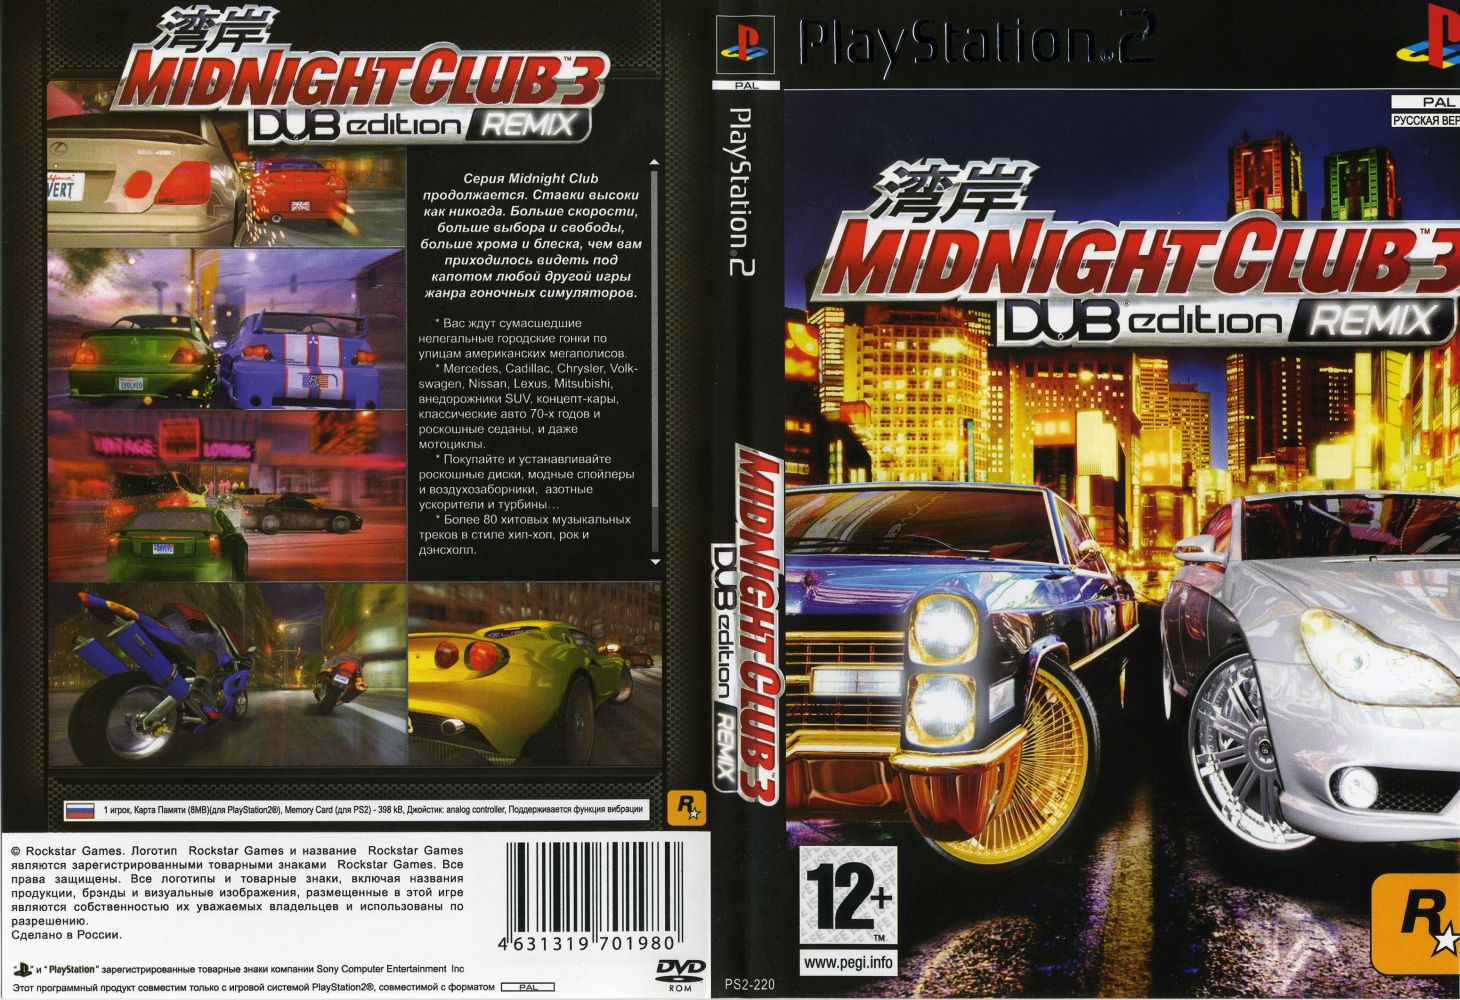 Midnight club 3 dub edition remix pc download utorrent free owl catching invisible prey torrent